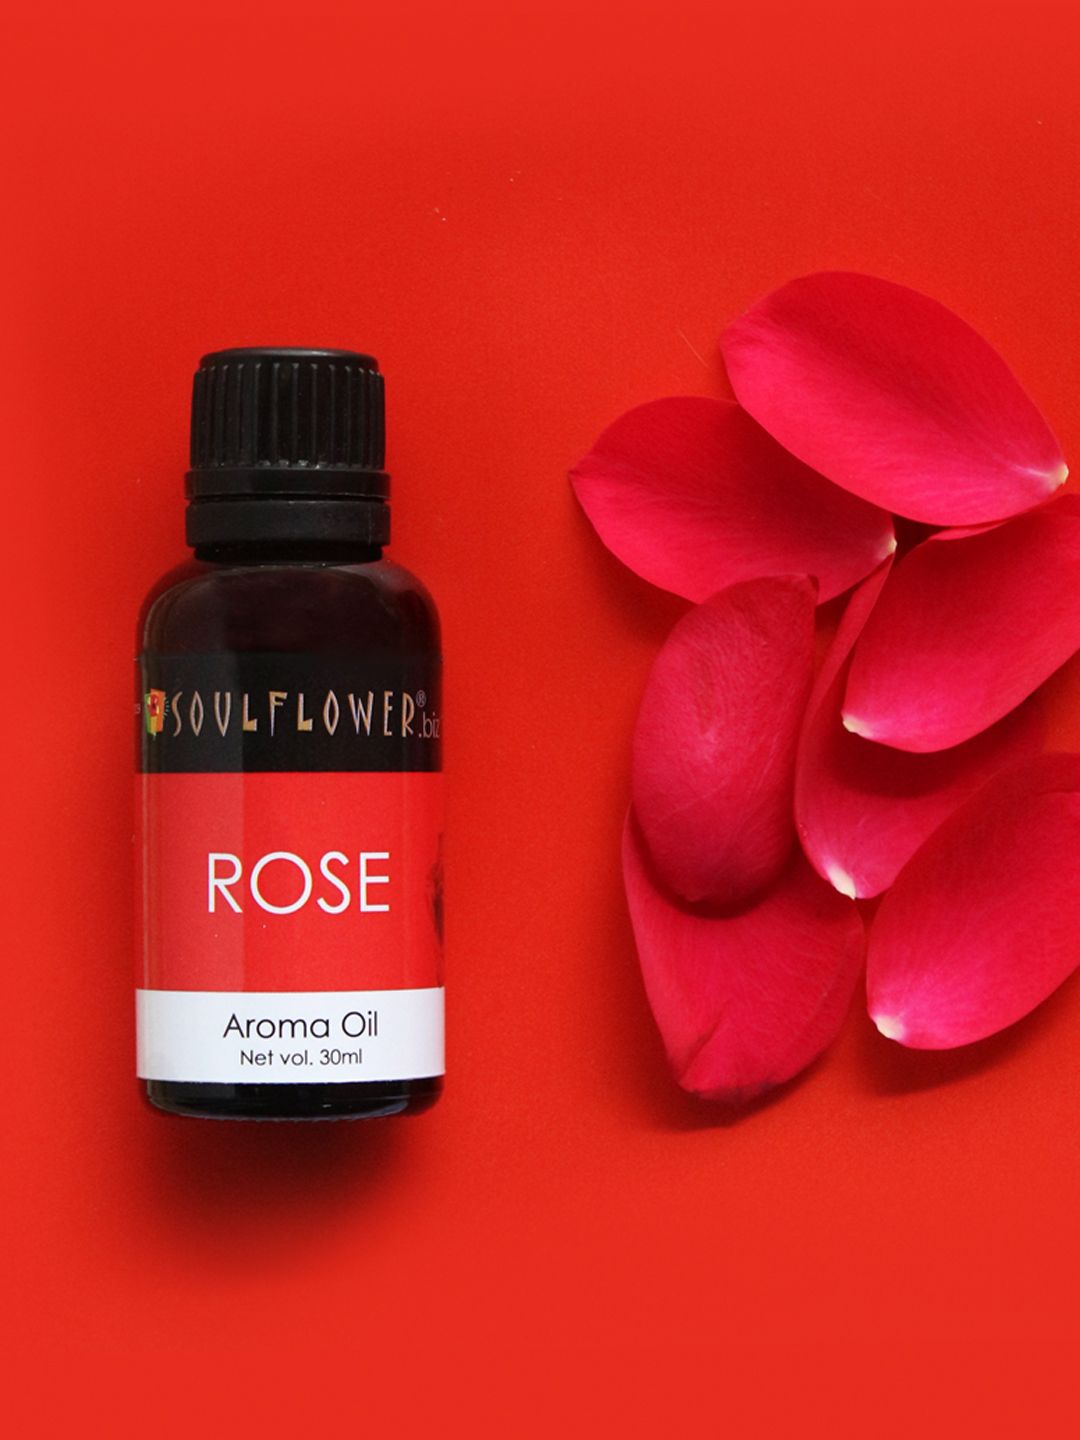 Soulflower Unisex Rose Aroma Oil 30ml Price in India